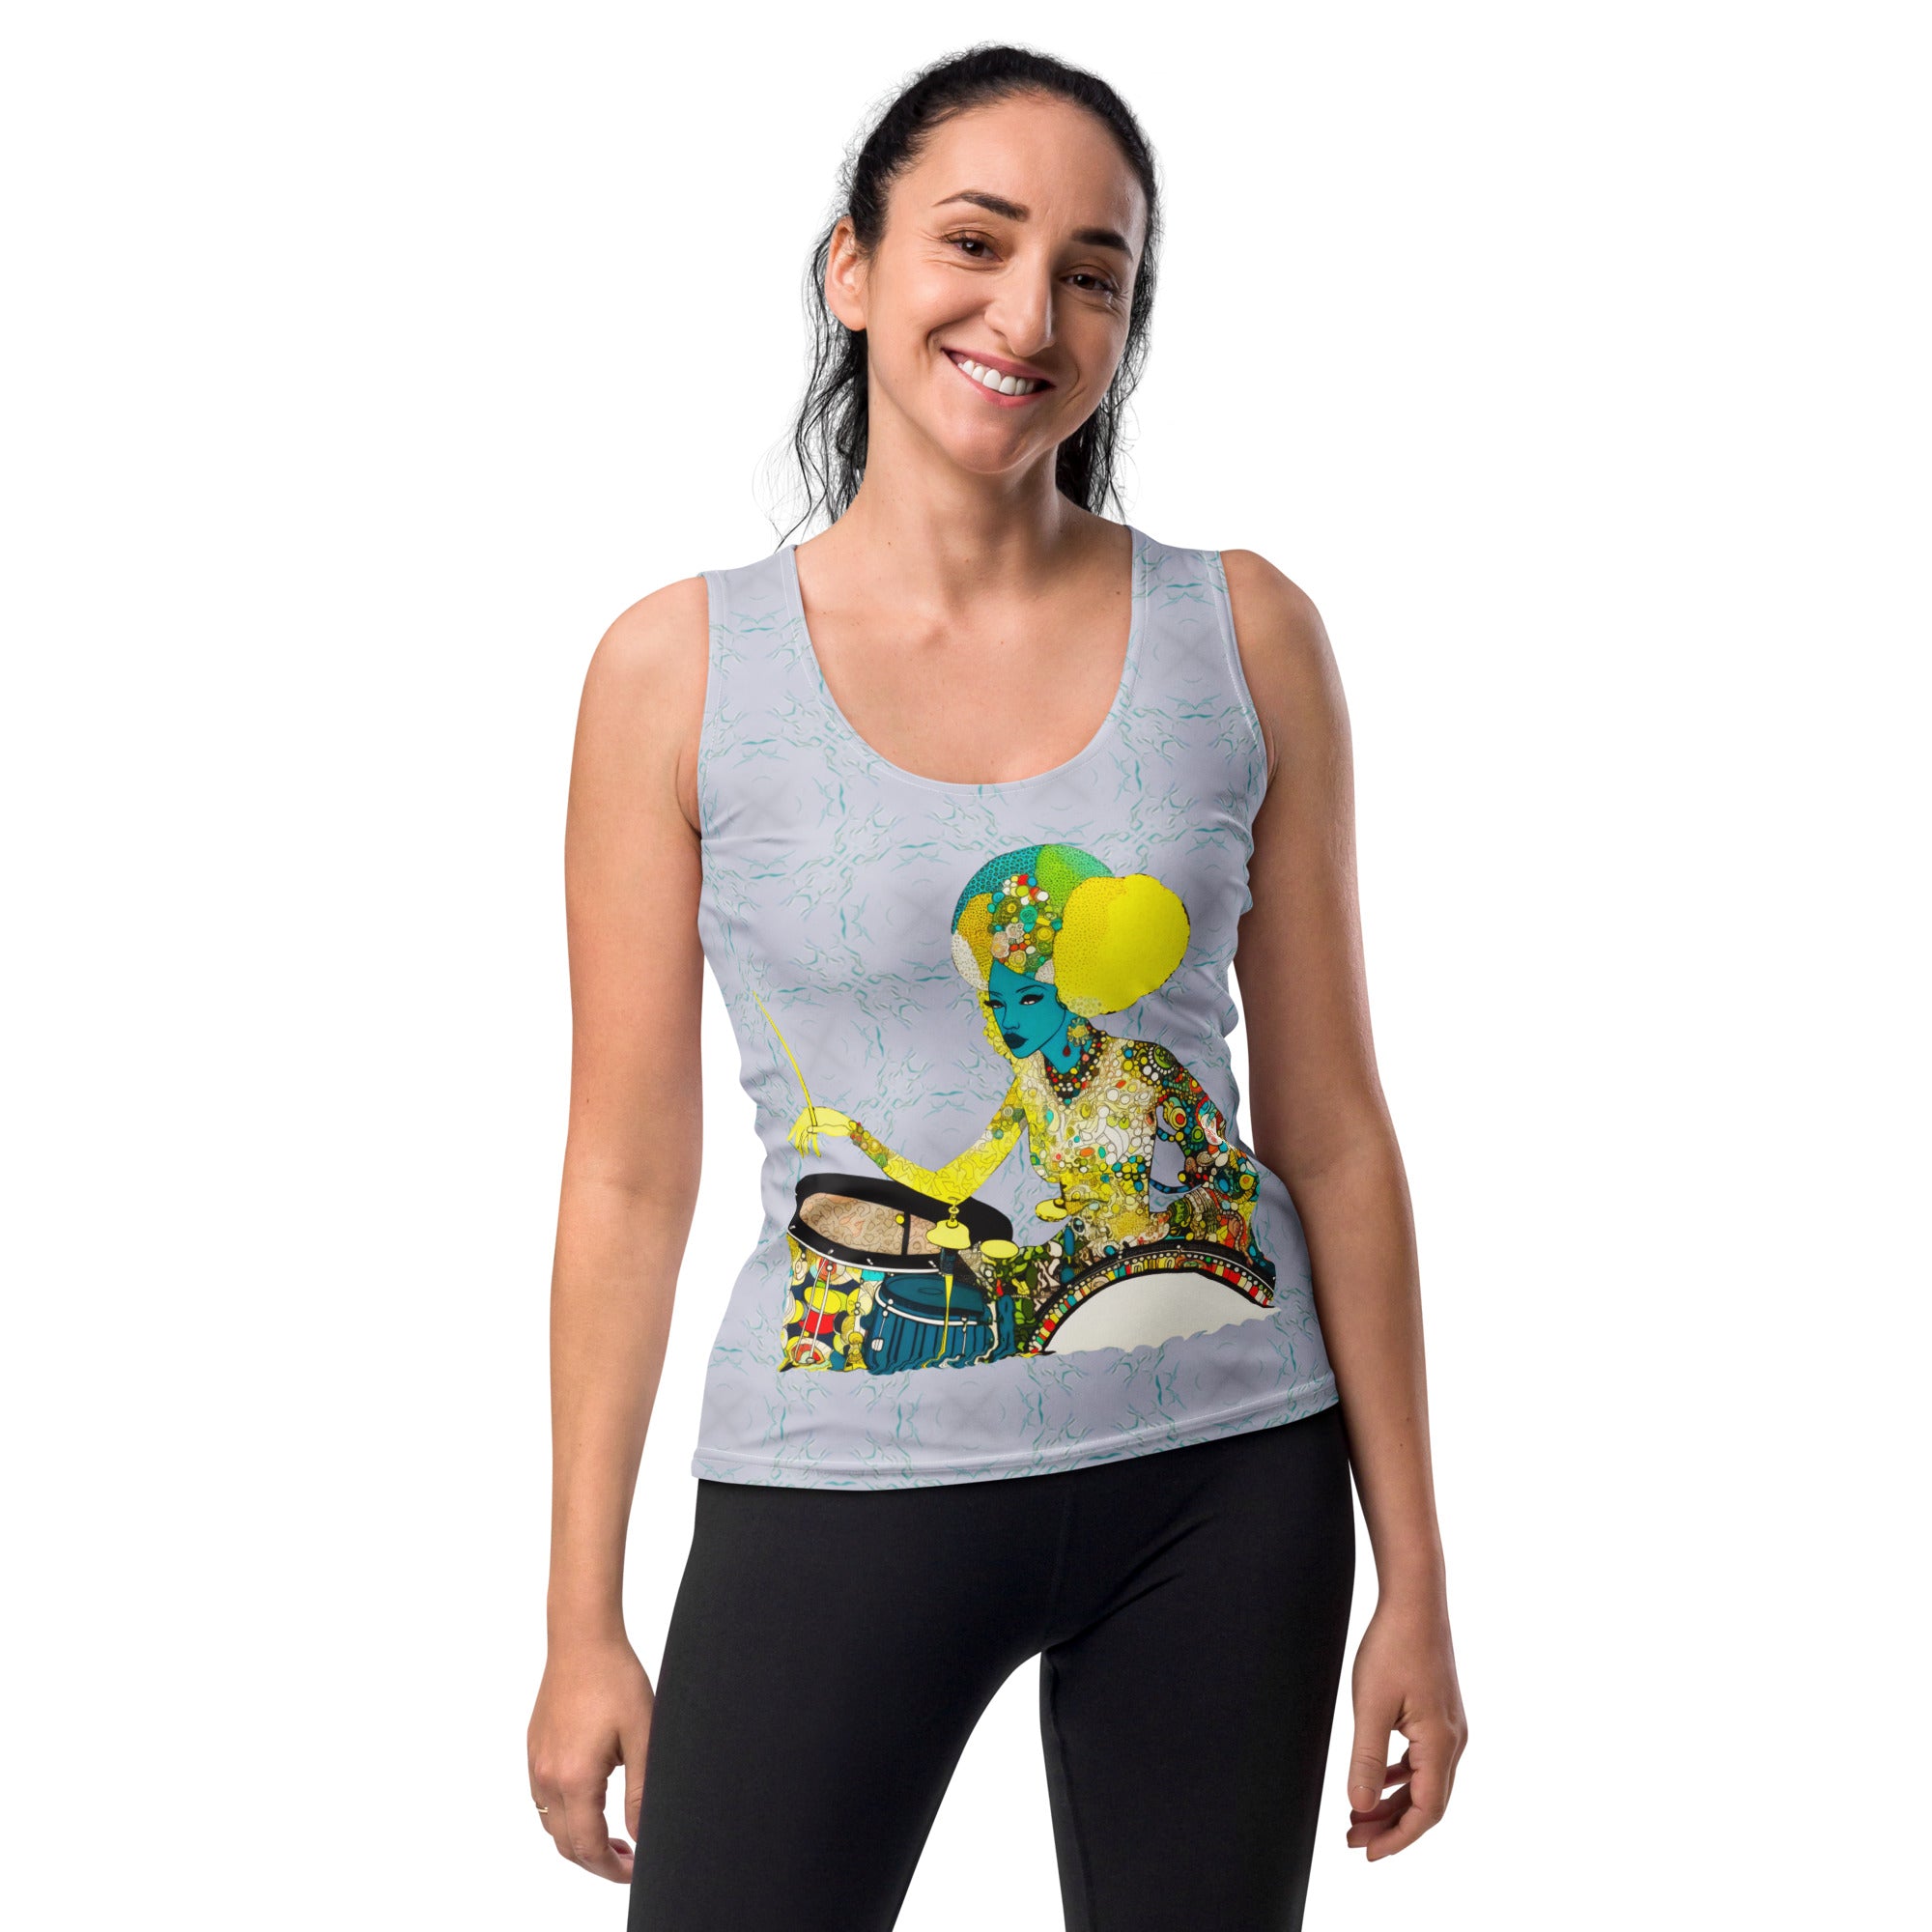 Flower Child Revolution Women's Tank Top on a clothing mannequin.